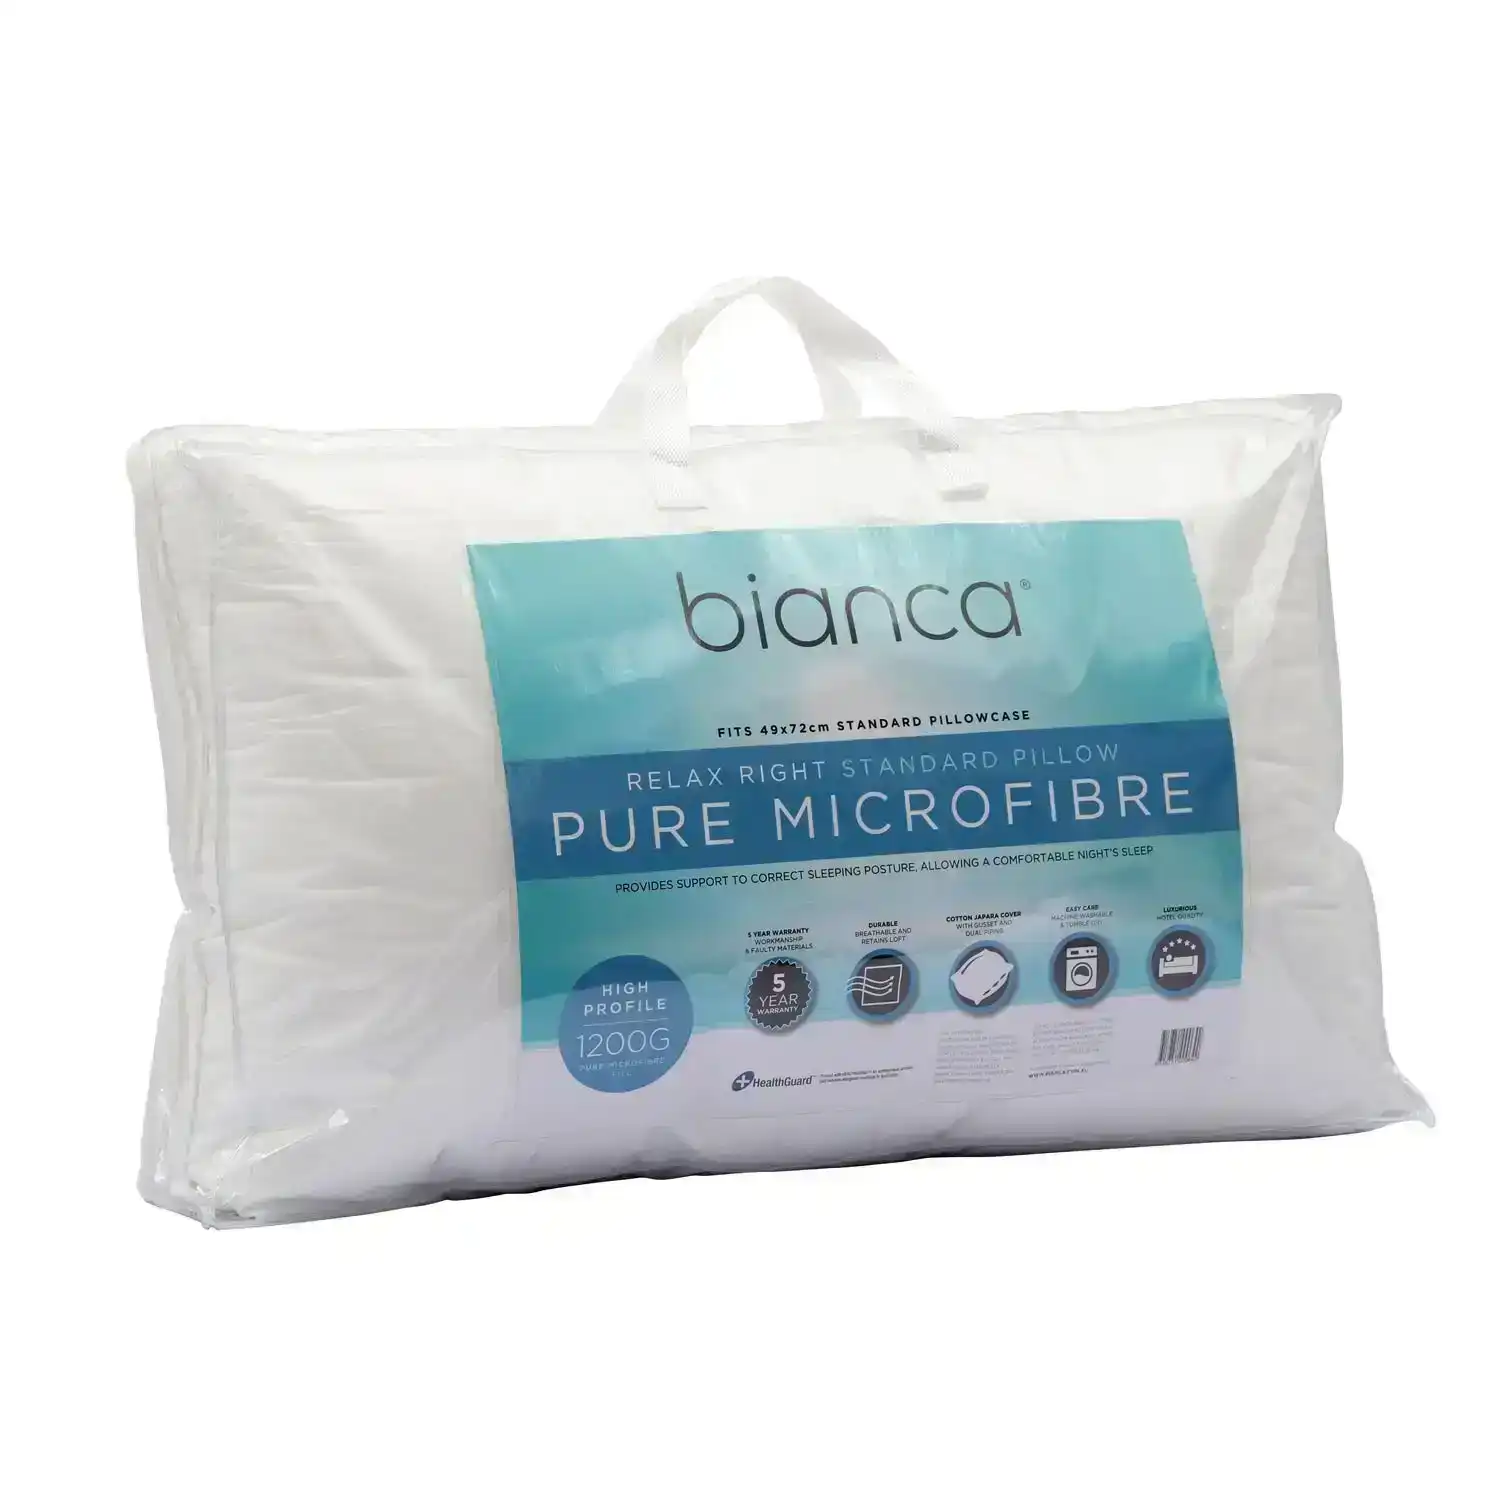 Bianca Bedding RELAX RIGHT PURE MICROFIBRE PILLOW HIGH PROFILE 1200G